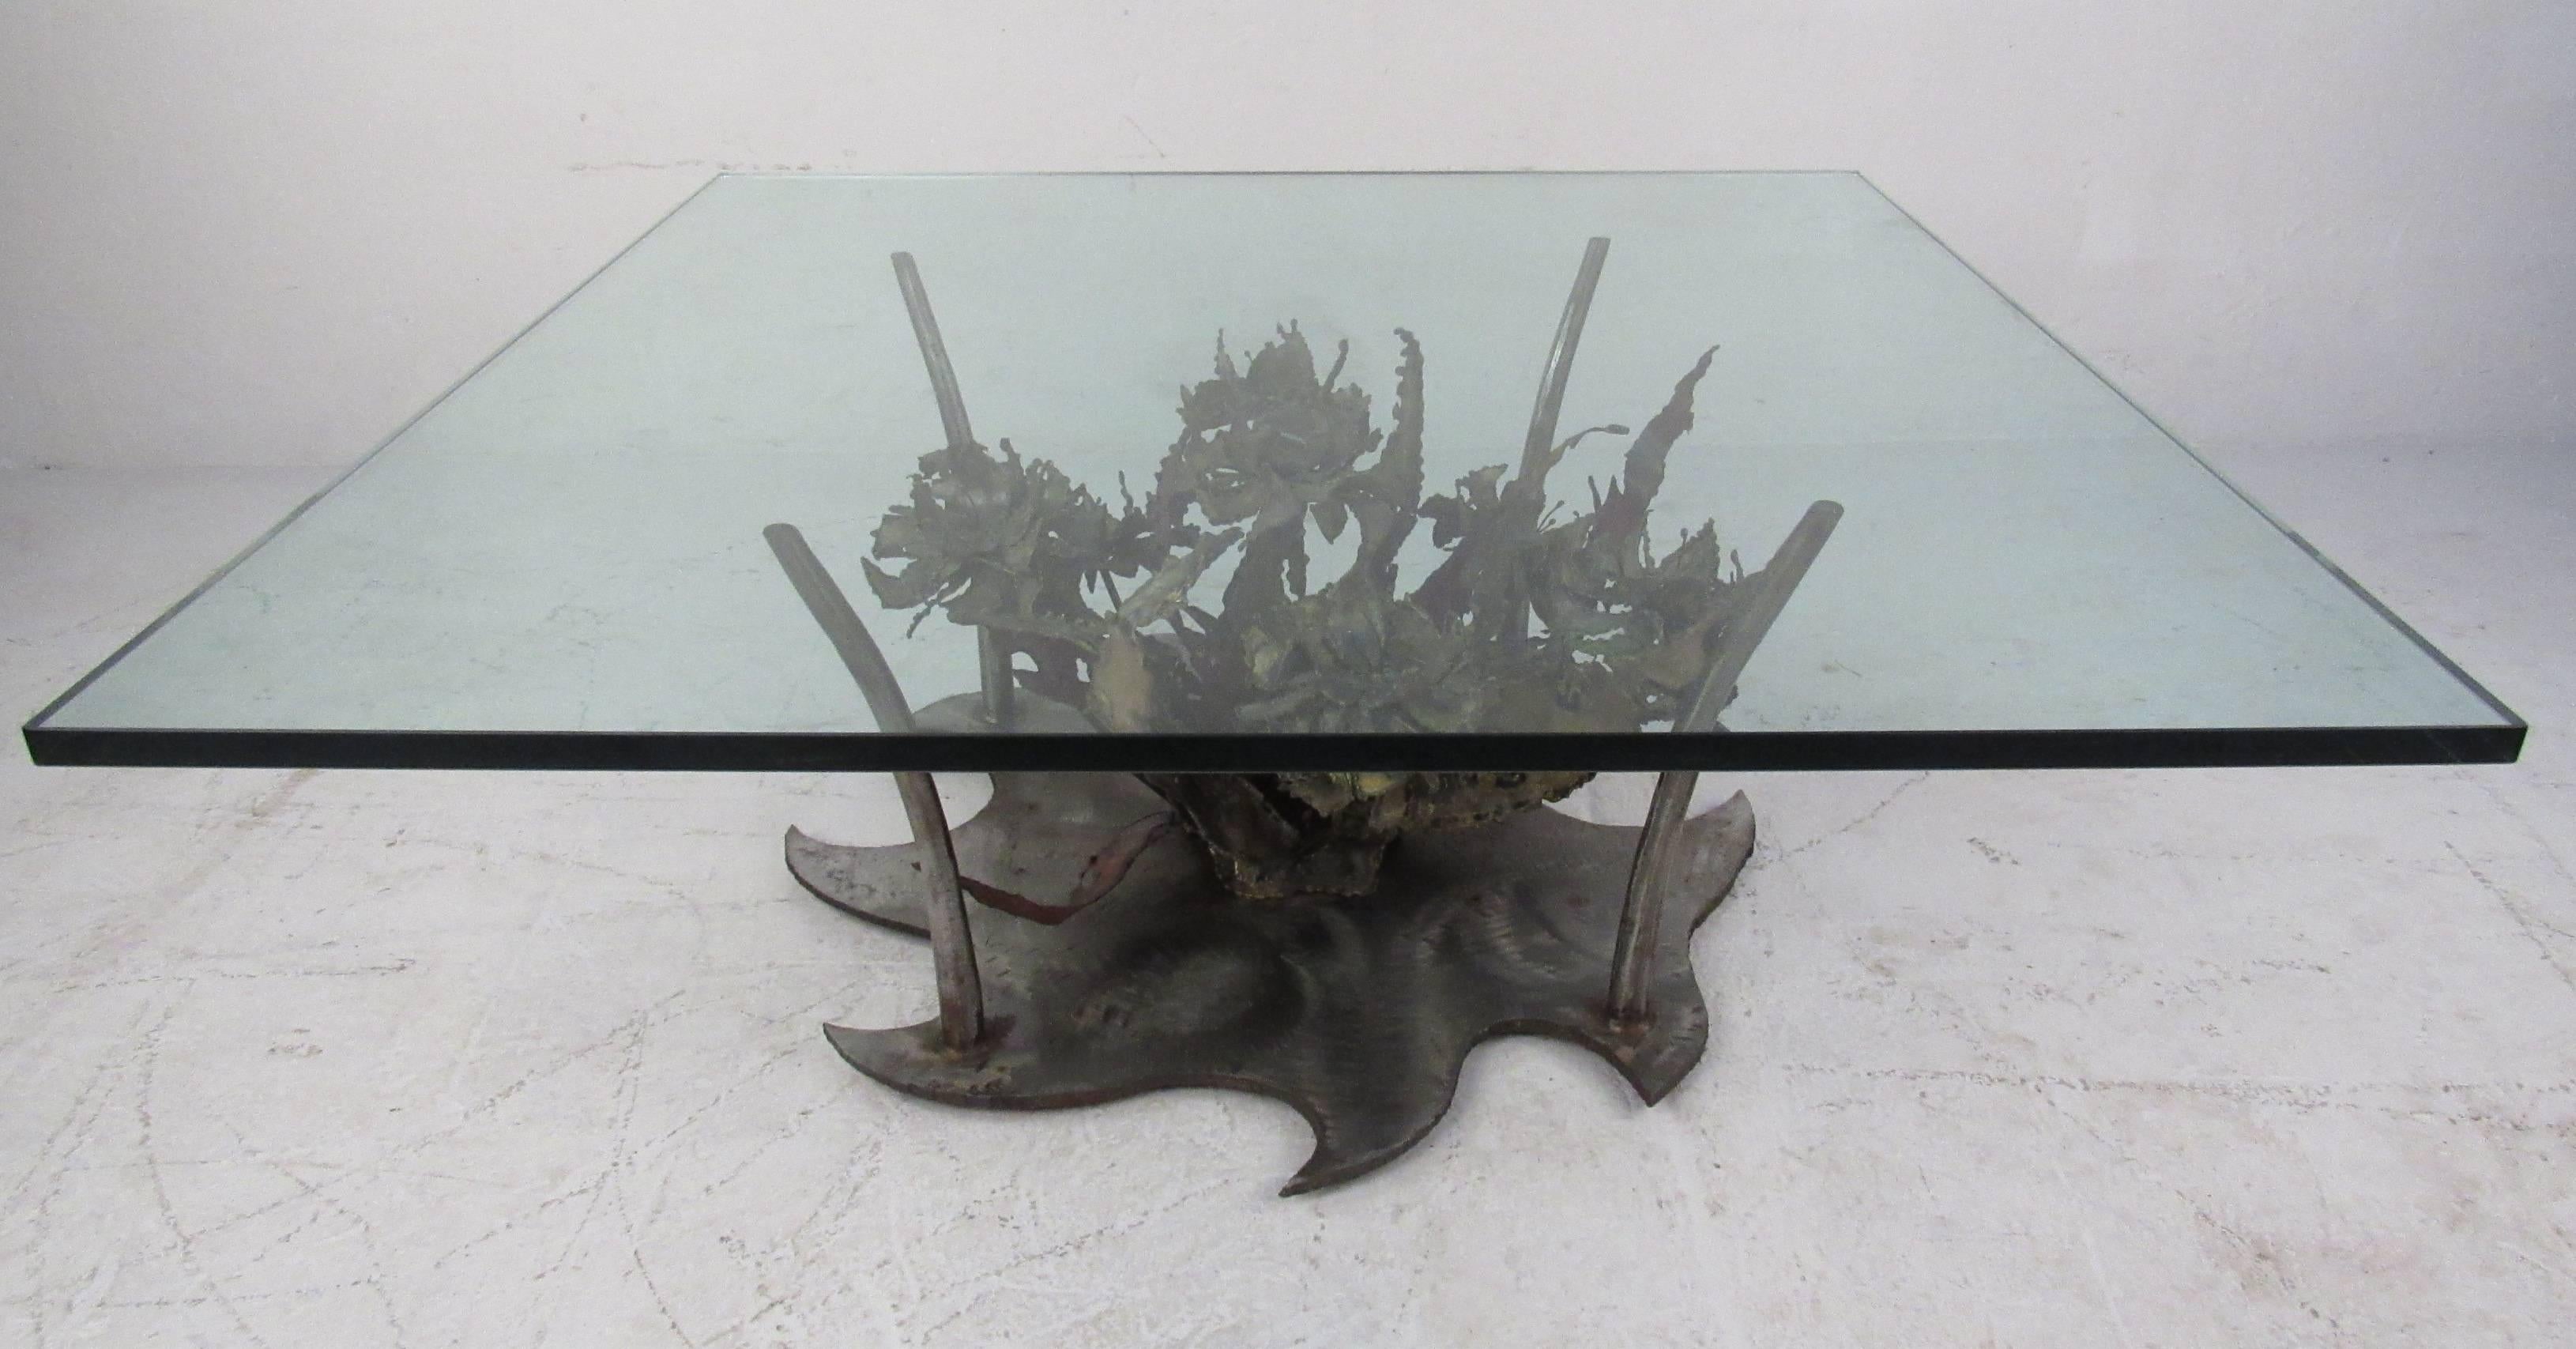 Nice abstract Brutalist flora motif in mixed metals. Signed 1971. Please confirm item location (NY or NJ) with dealer.